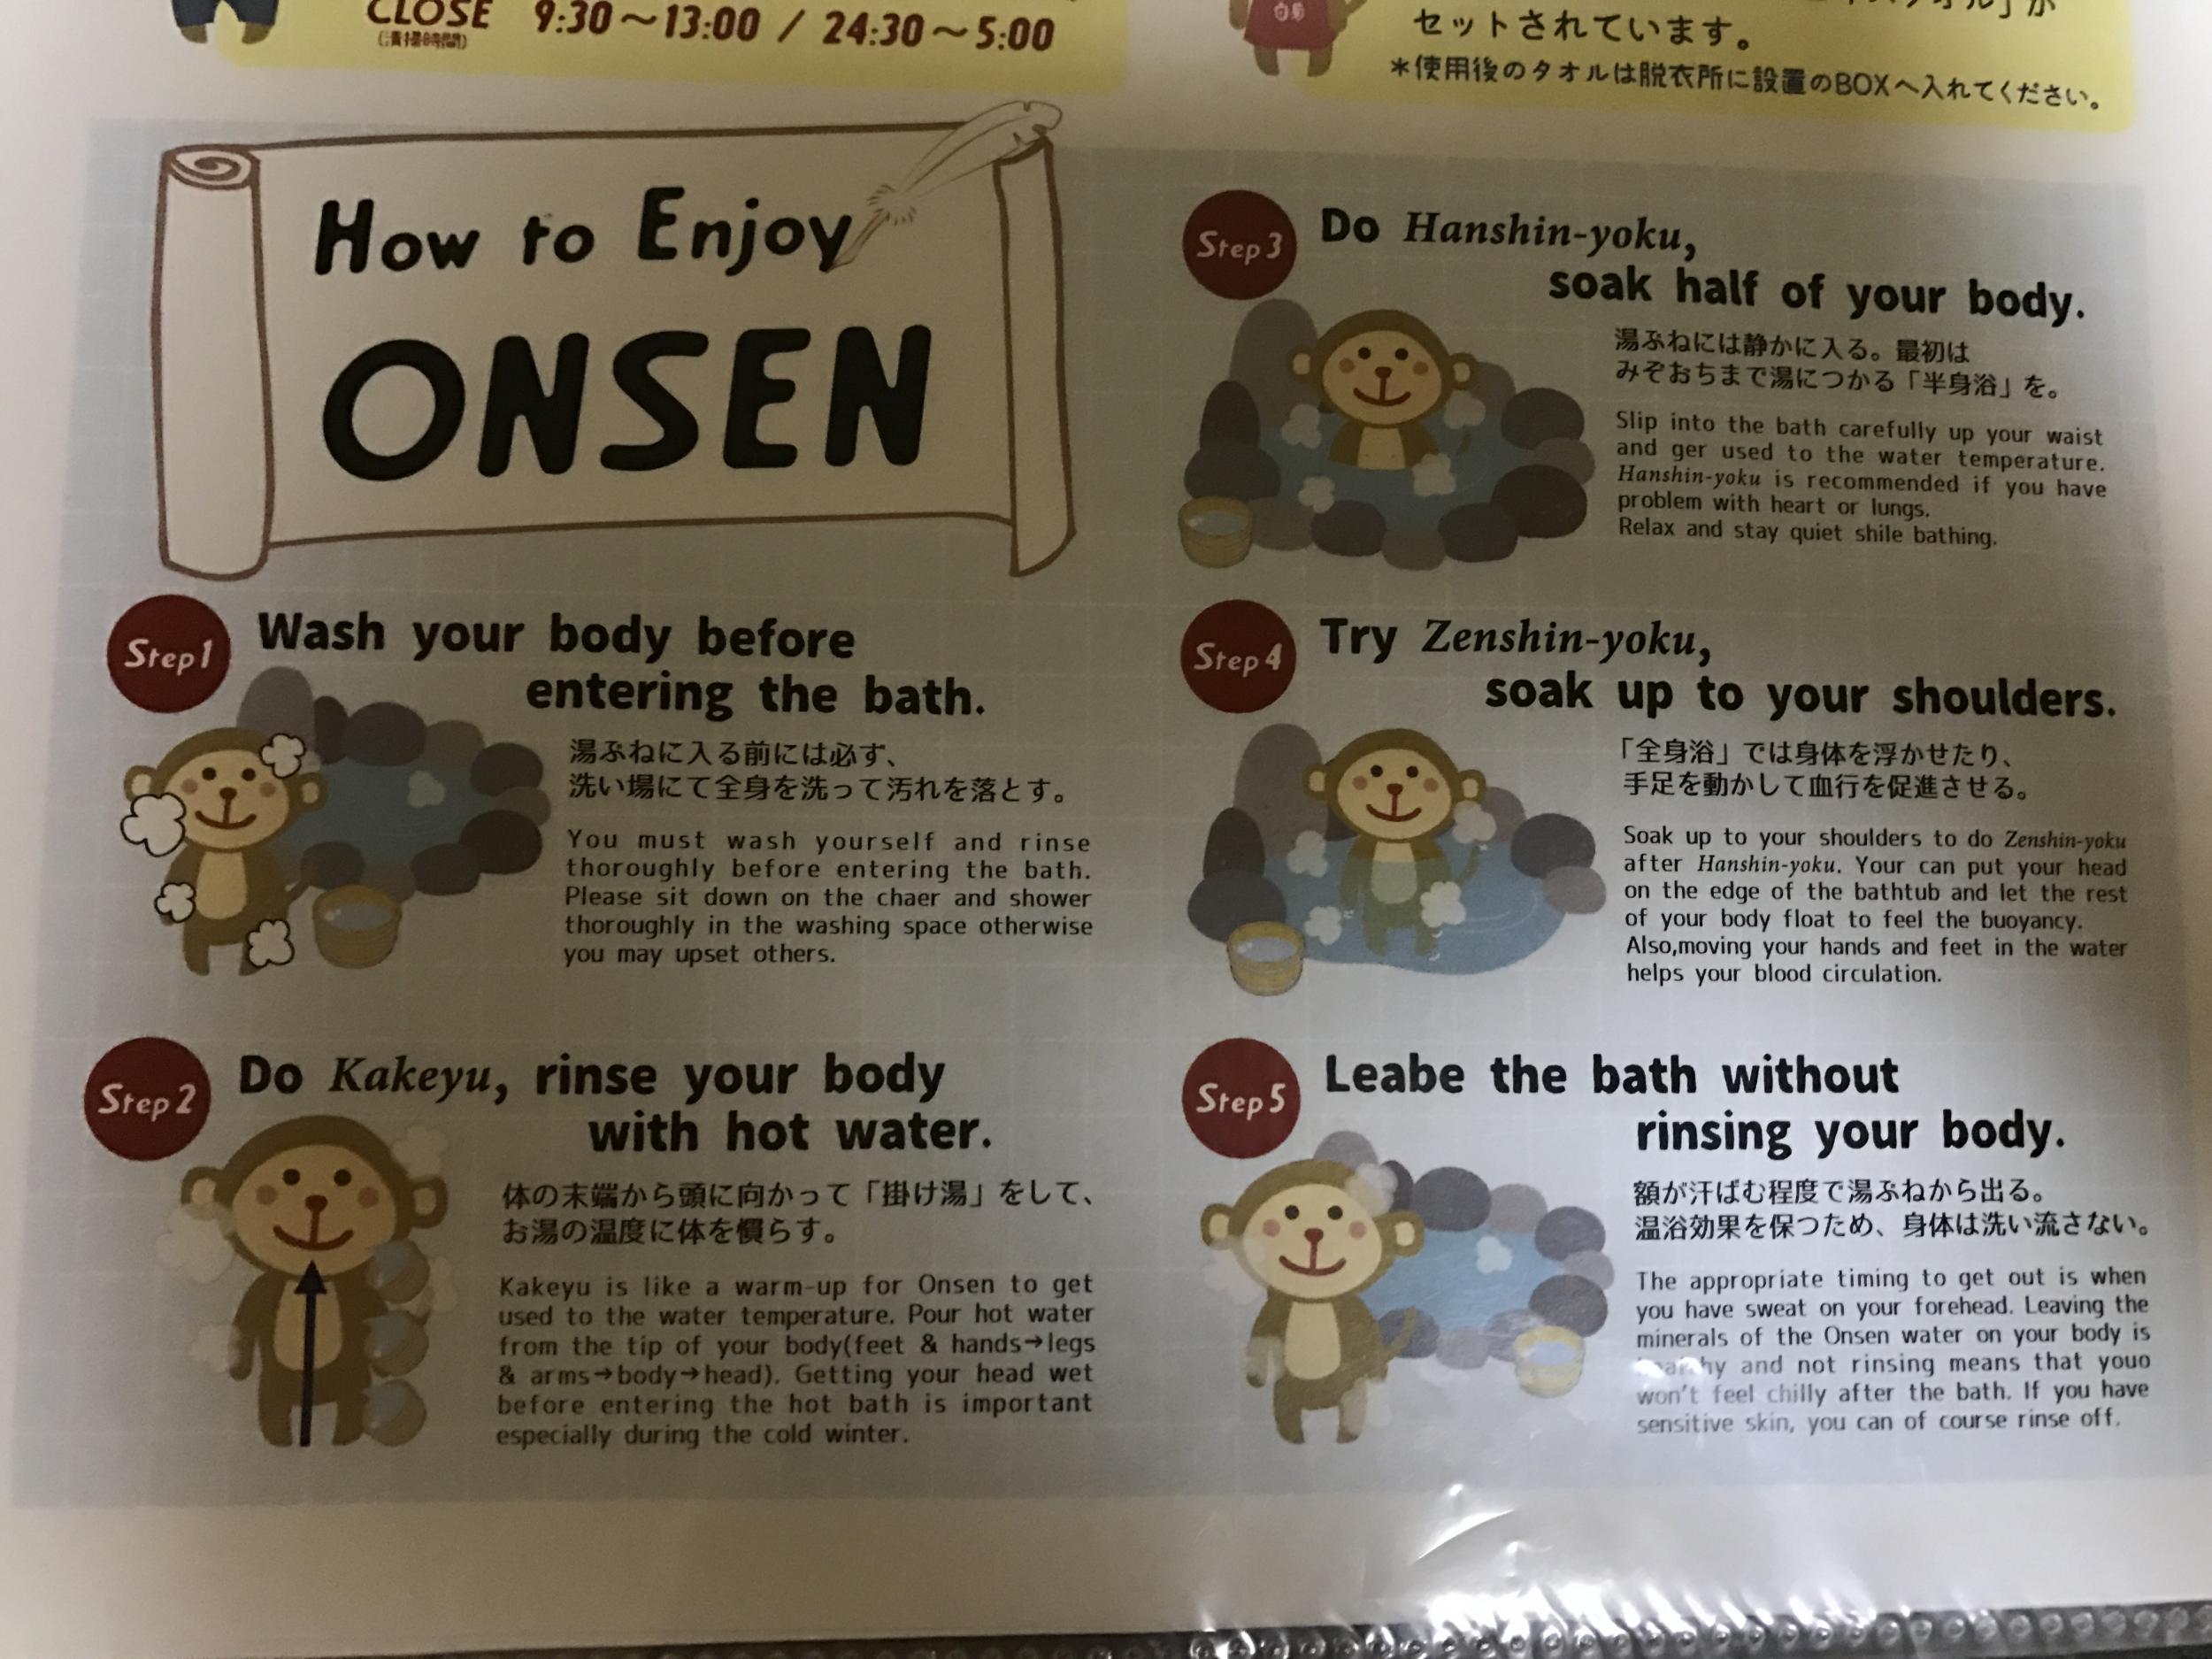 Onsen rules are translated into English